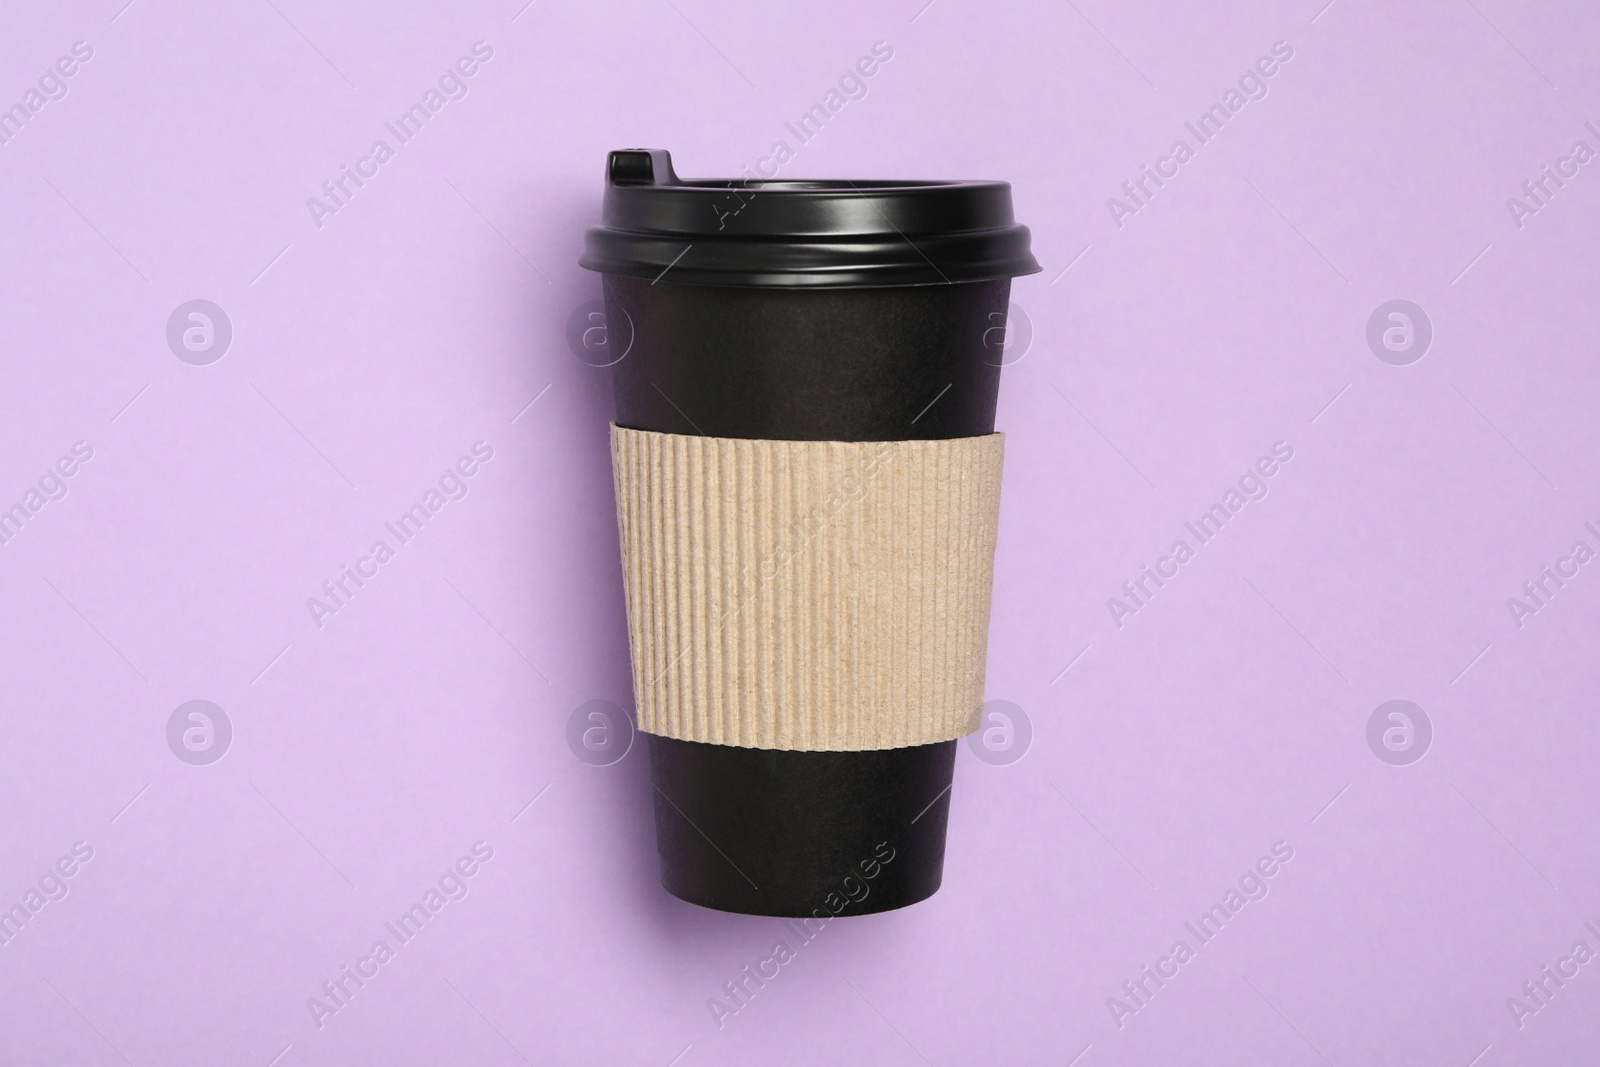 Photo of Takeaway paper coffee cup with cardboard sleeve on violet background, top view